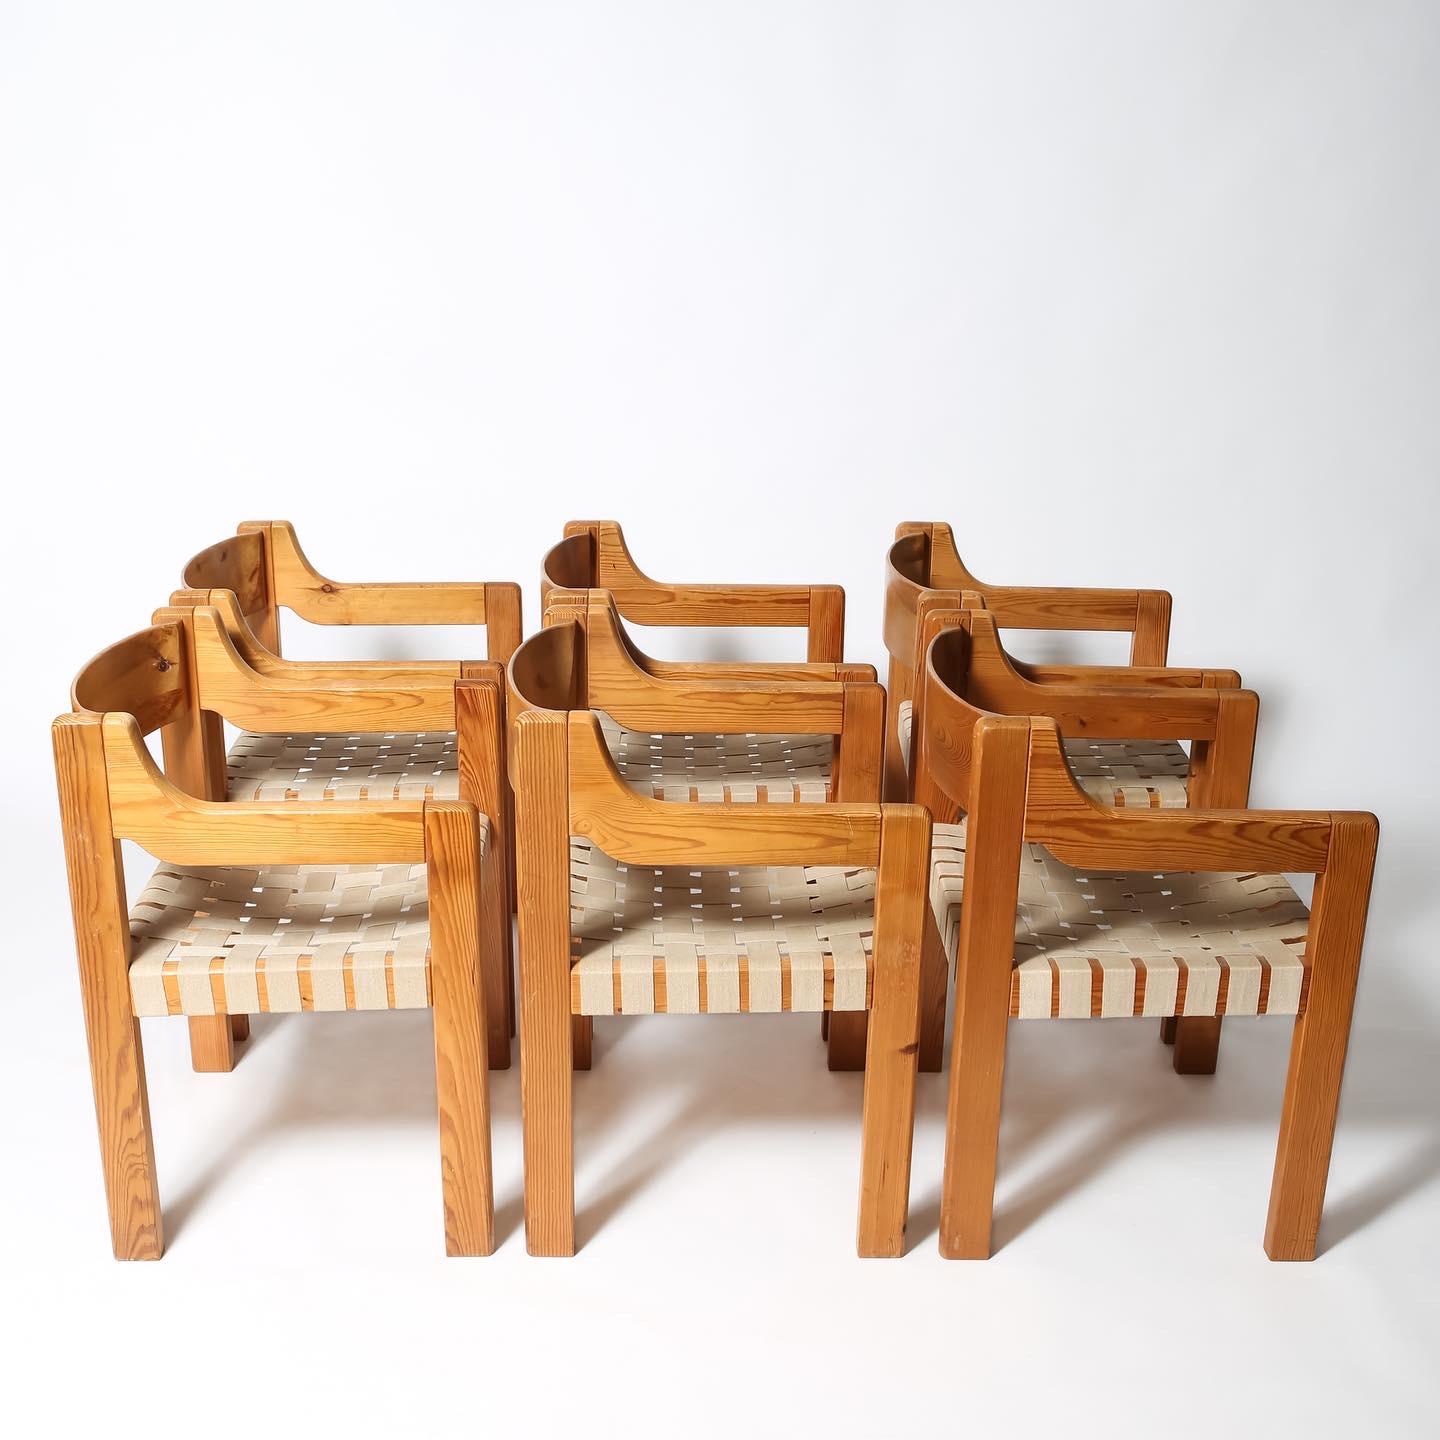 Fantastic set of six woven dining chairs in pine. Substantial frames, reminiscent of Karin Mobring or Vico Magistretti are the quintessential 1970s chalet vibe. Overall wear consistent with age; webbing appears to have been redone at some point but